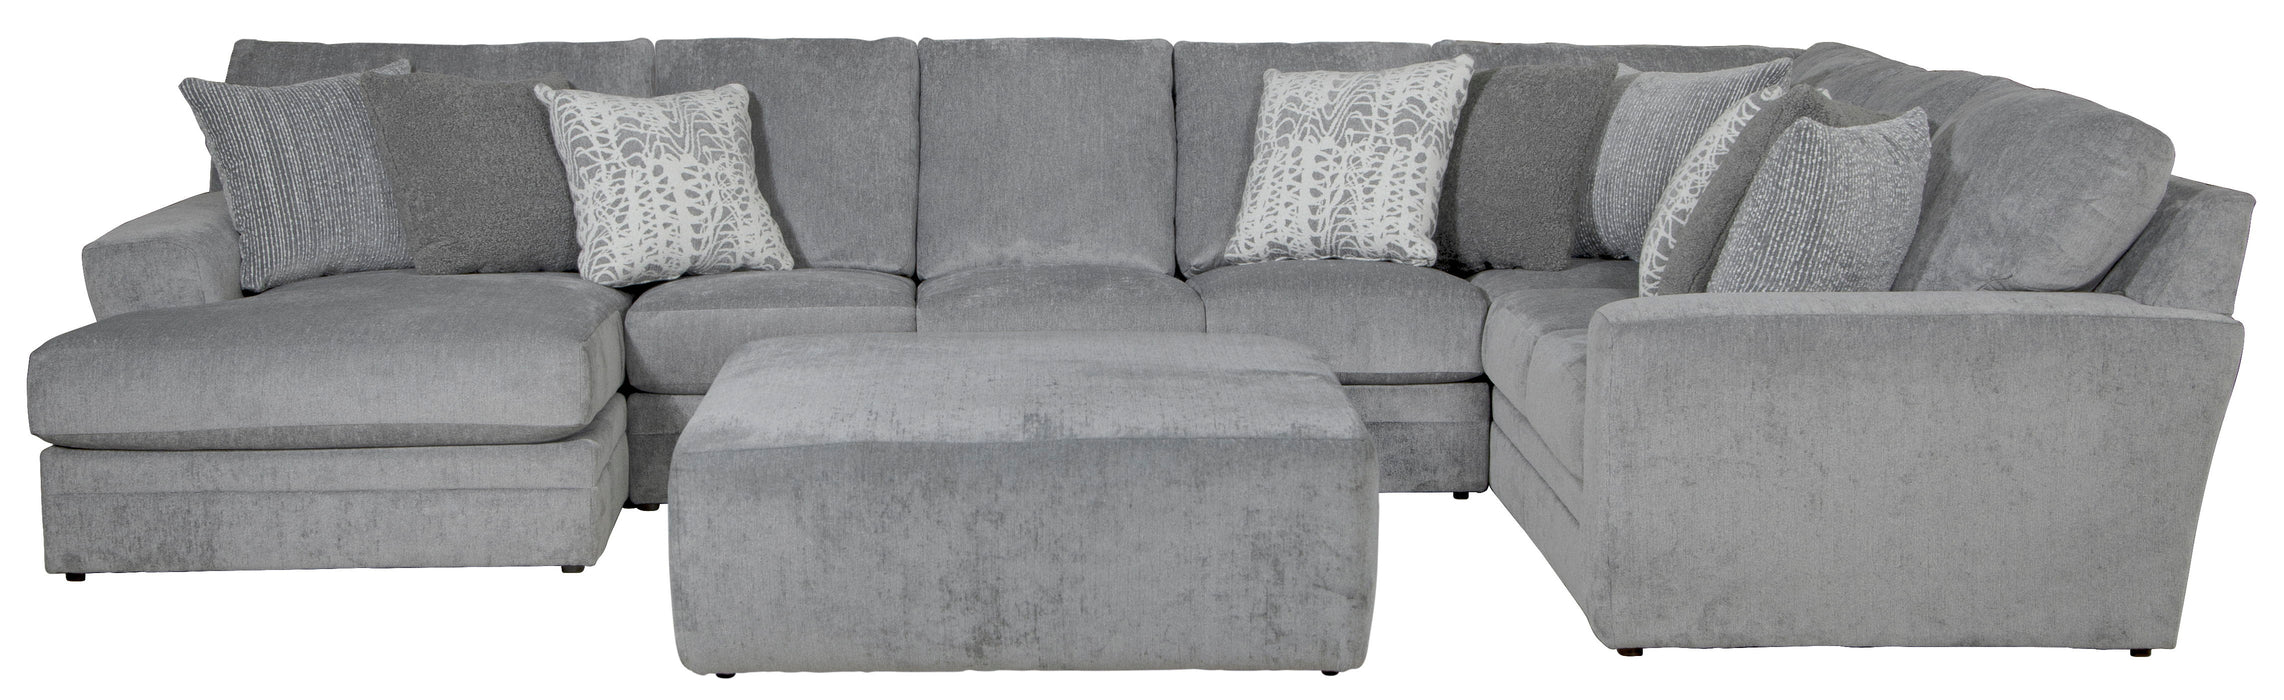 Glacier - Sectional With 9 Accent Pillows And Ottoman Set